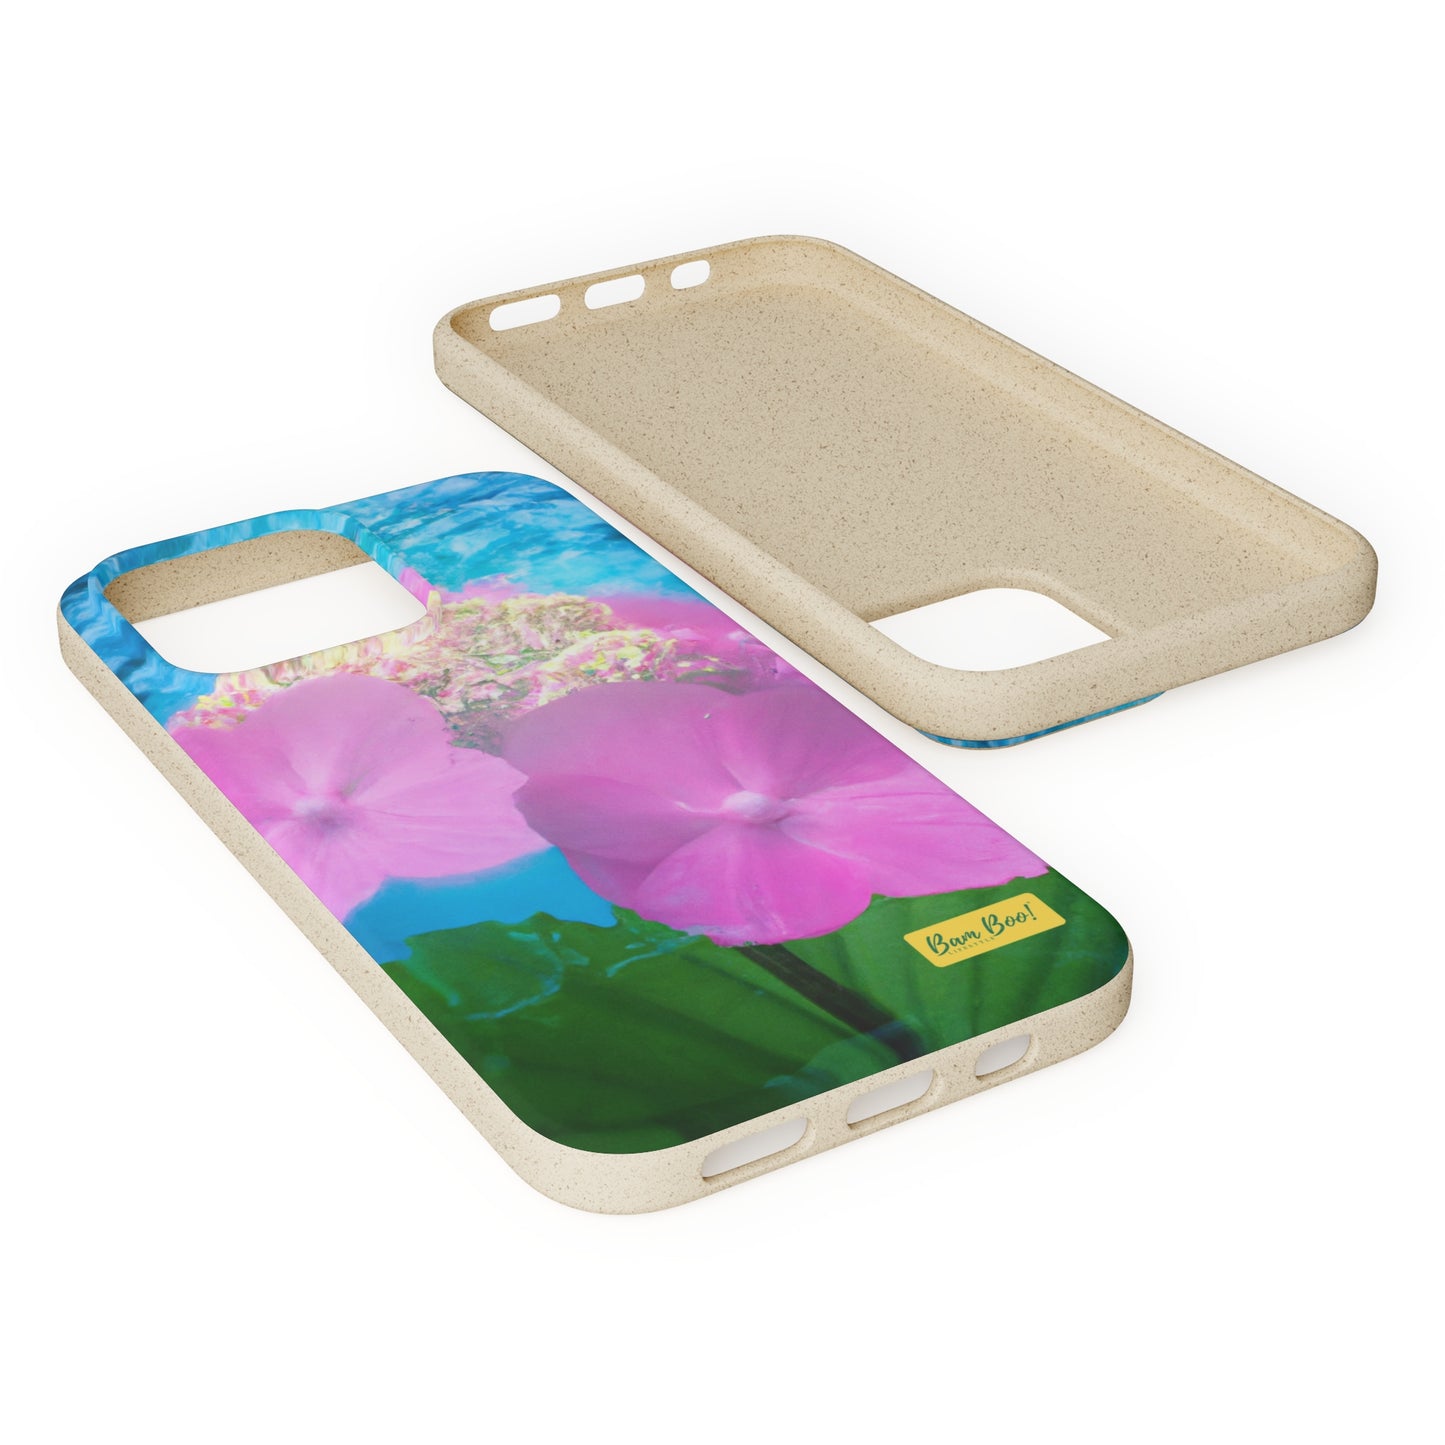 "Nature's Spectacle: A Photo-Digital Fusion." - Bam Boo! Lifestyle Eco-friendly Cases